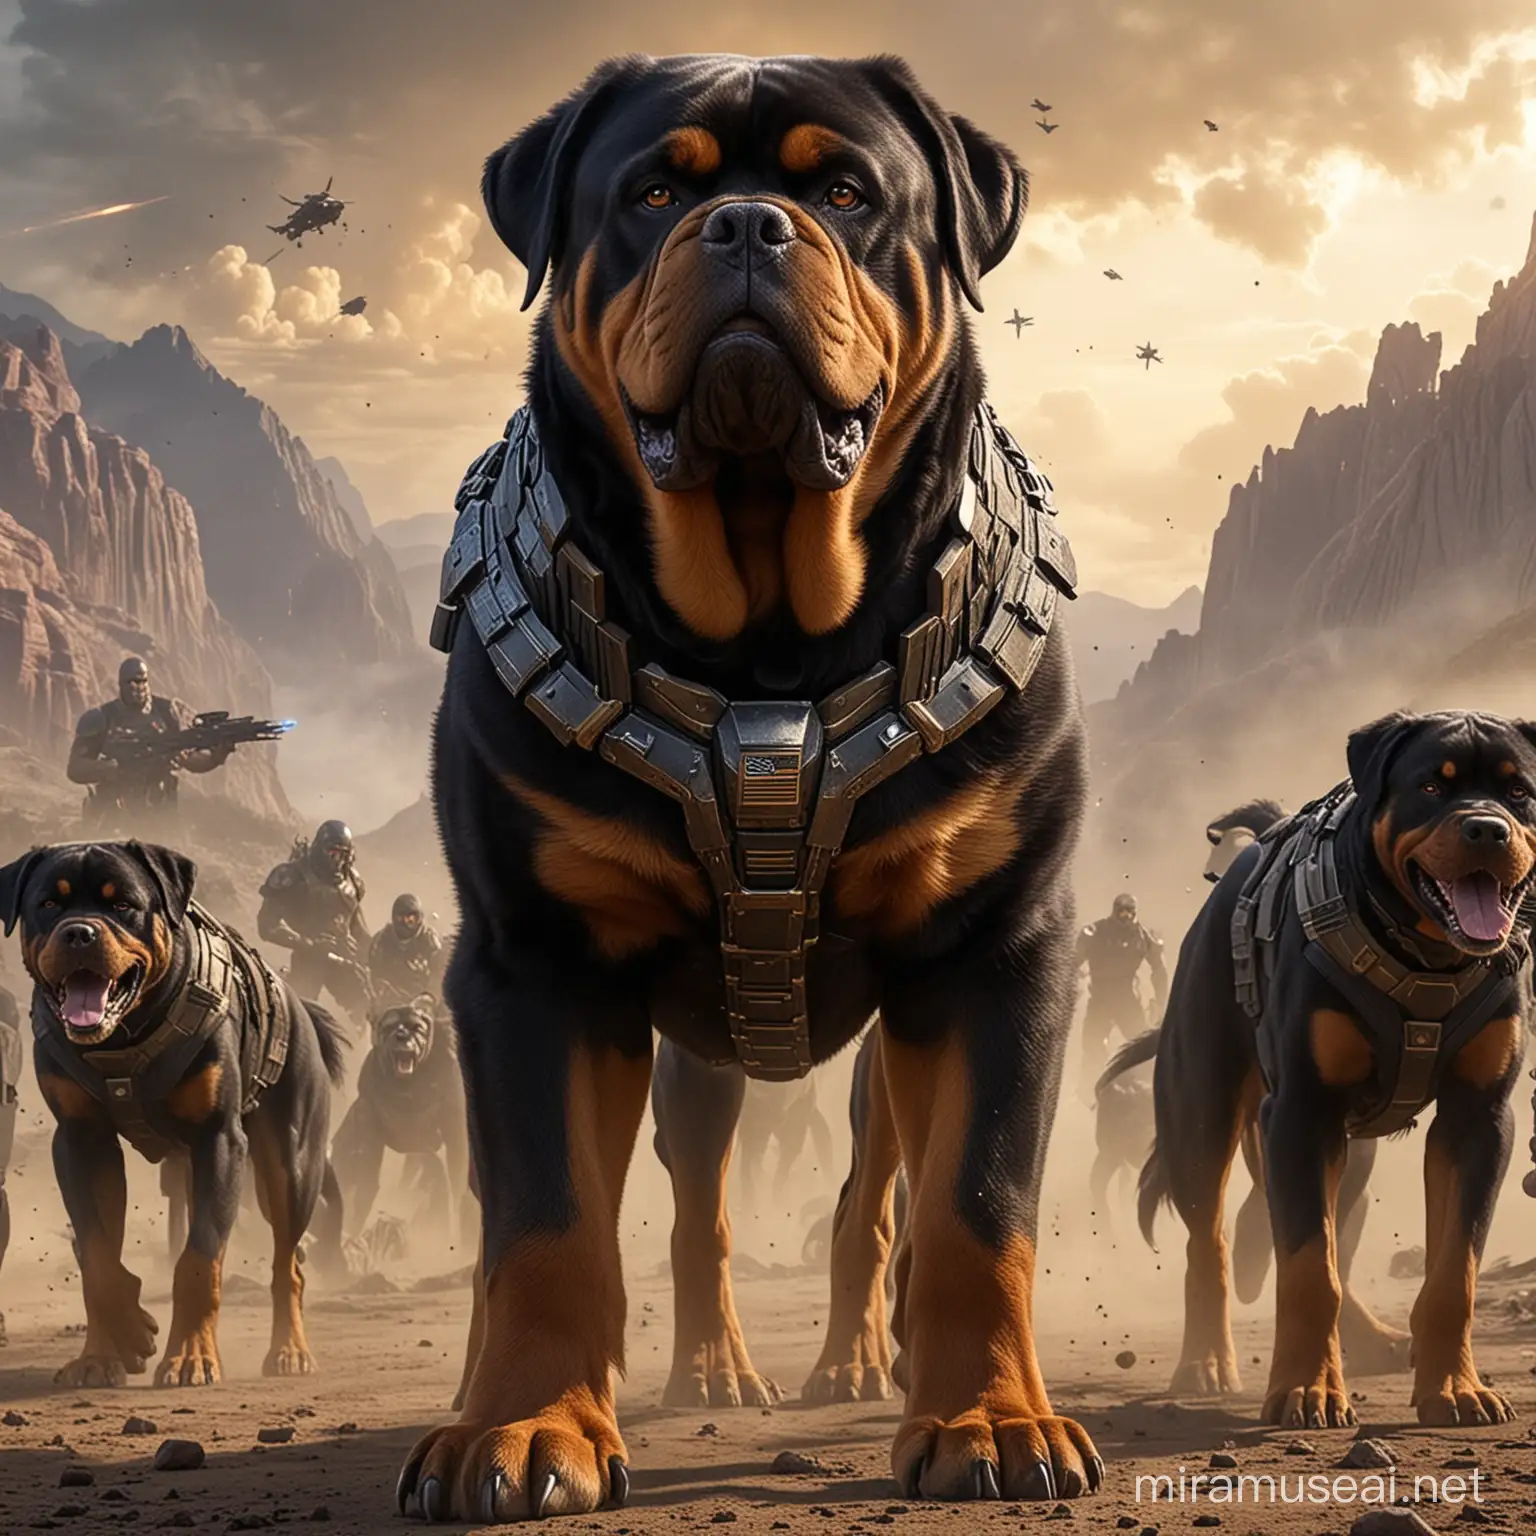 EPIC rotweiler THANOS ANGRY AND HIS ARMY dogs IN HIS PLANET TITAN